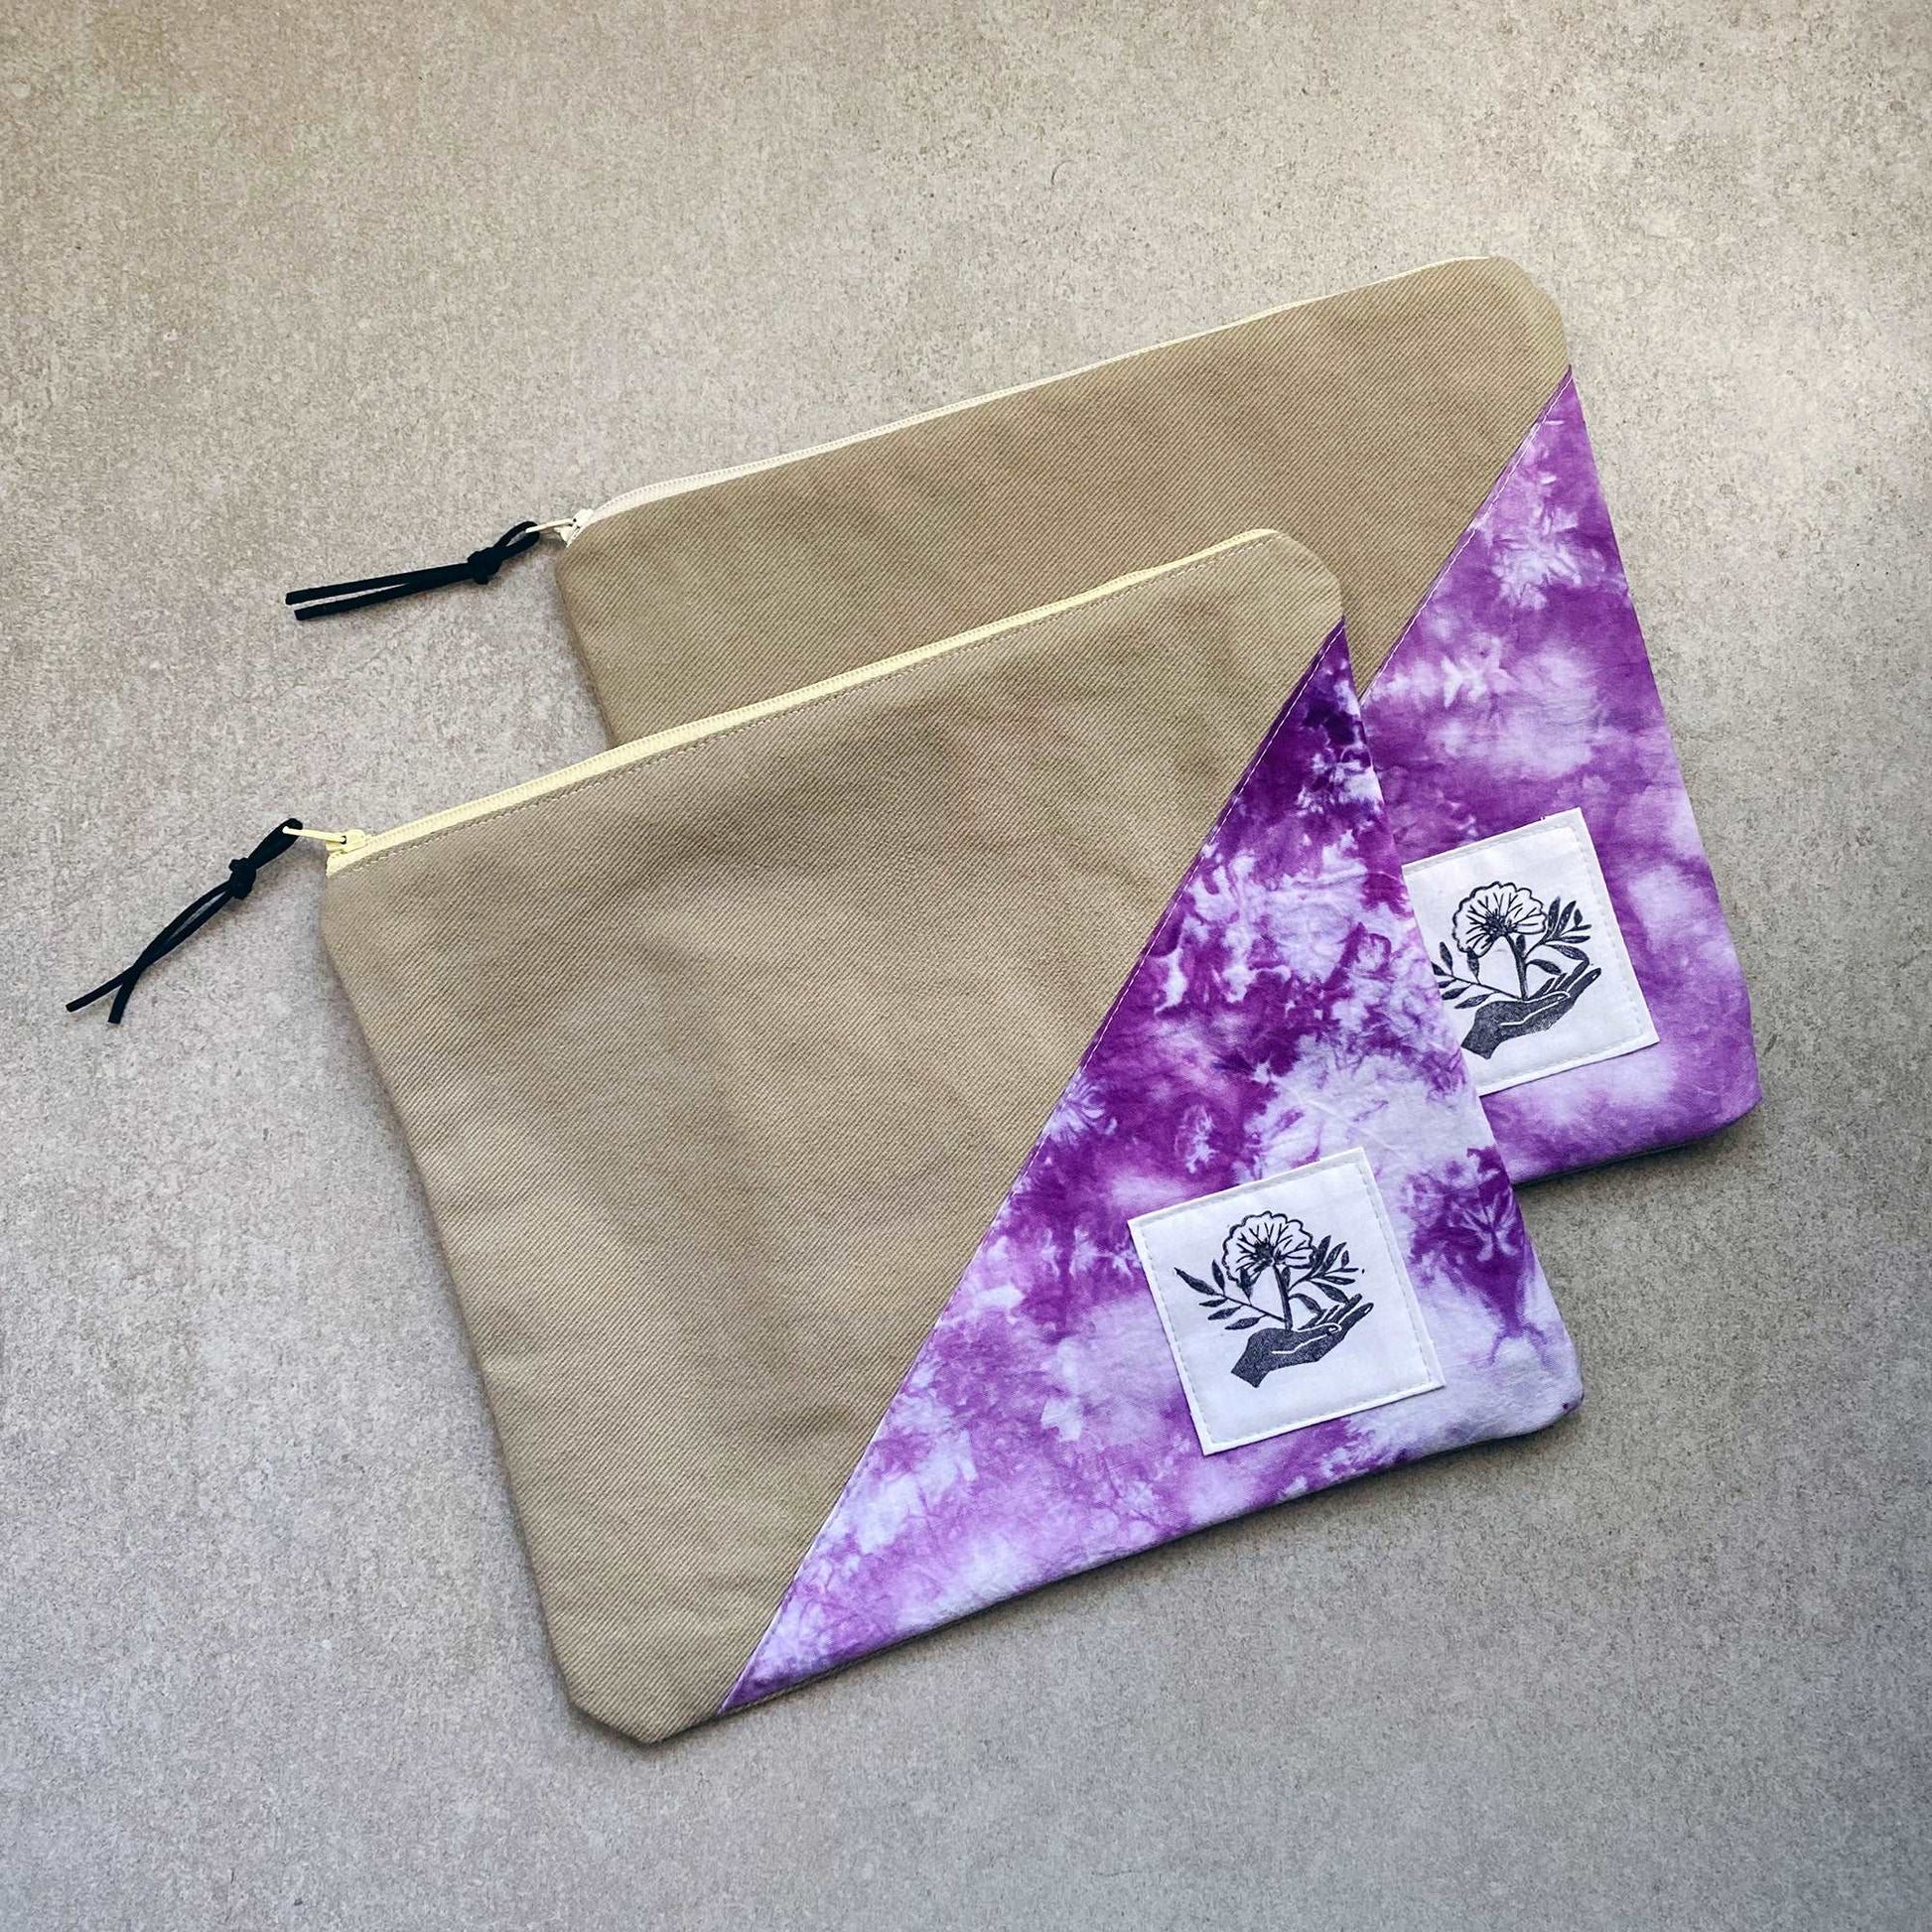 This is a photo of two large canvas zipper bags made with purple and white tie dye fabric panels. They are laying on a light gray background.